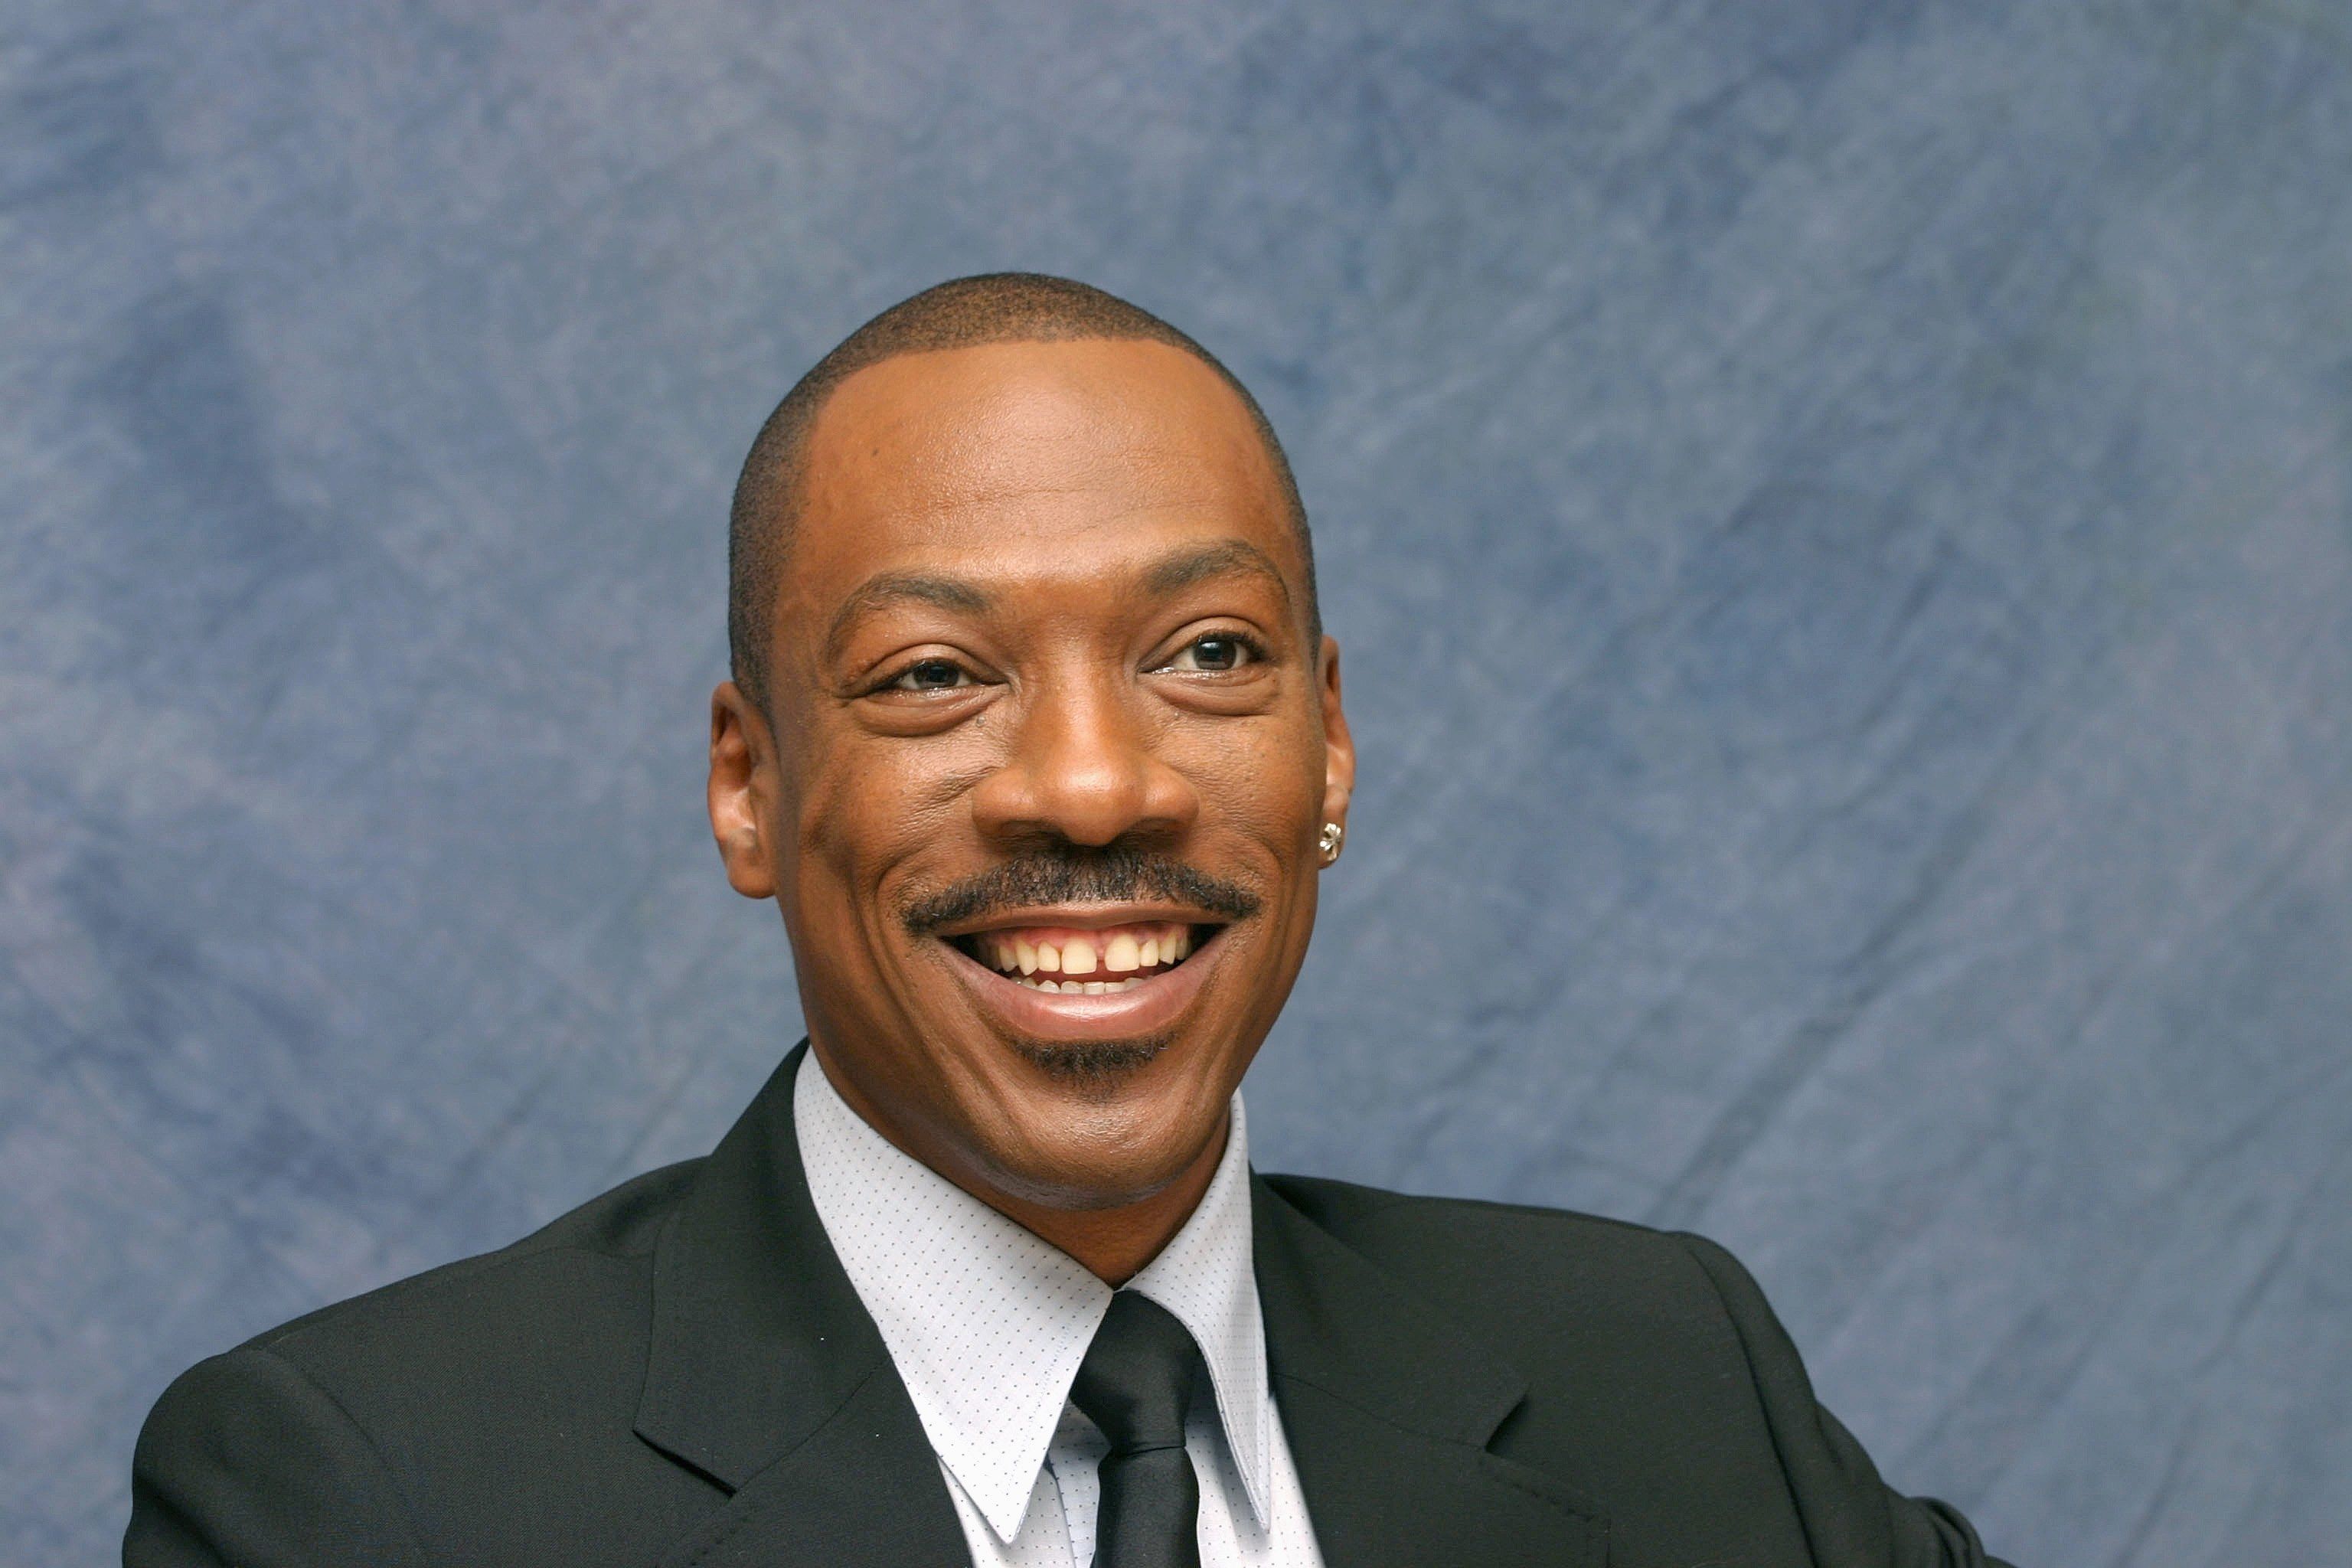 Eddie Murphy at the Beverly Hilton Hotel on November 17, 2006 in Beverly Hills. | Photo: Getty Images